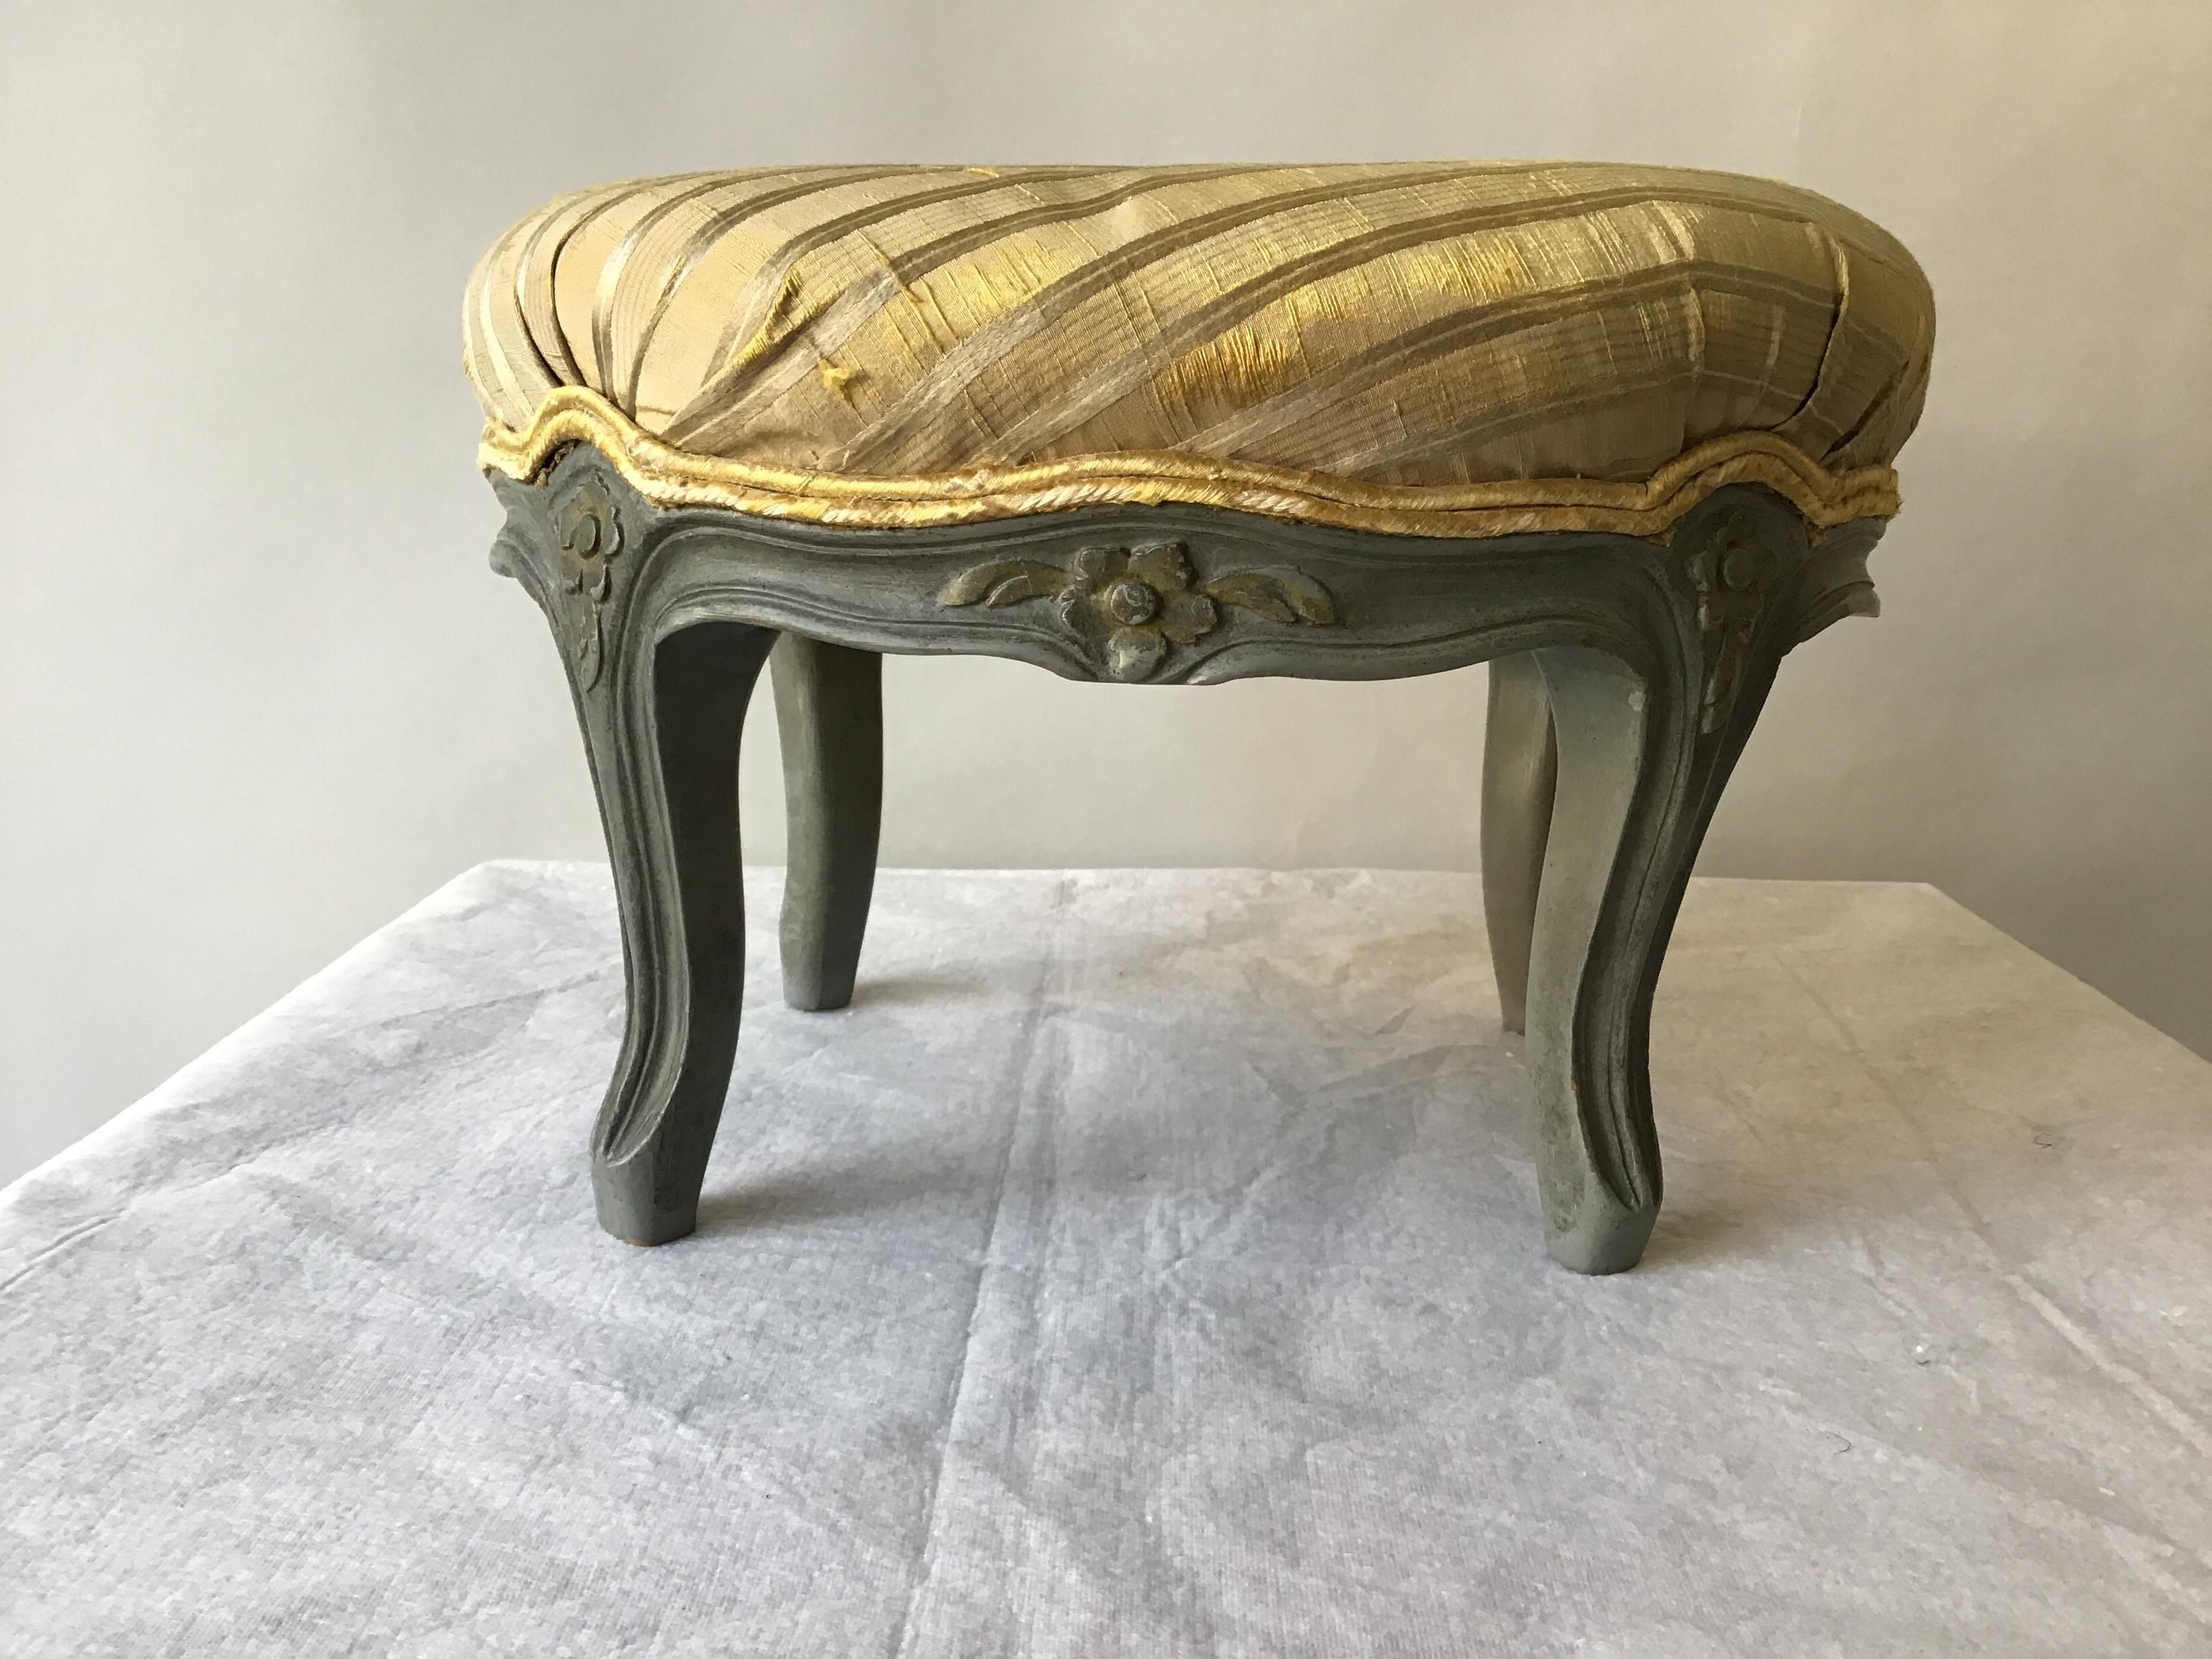 1910 French carved wood painted footstool.